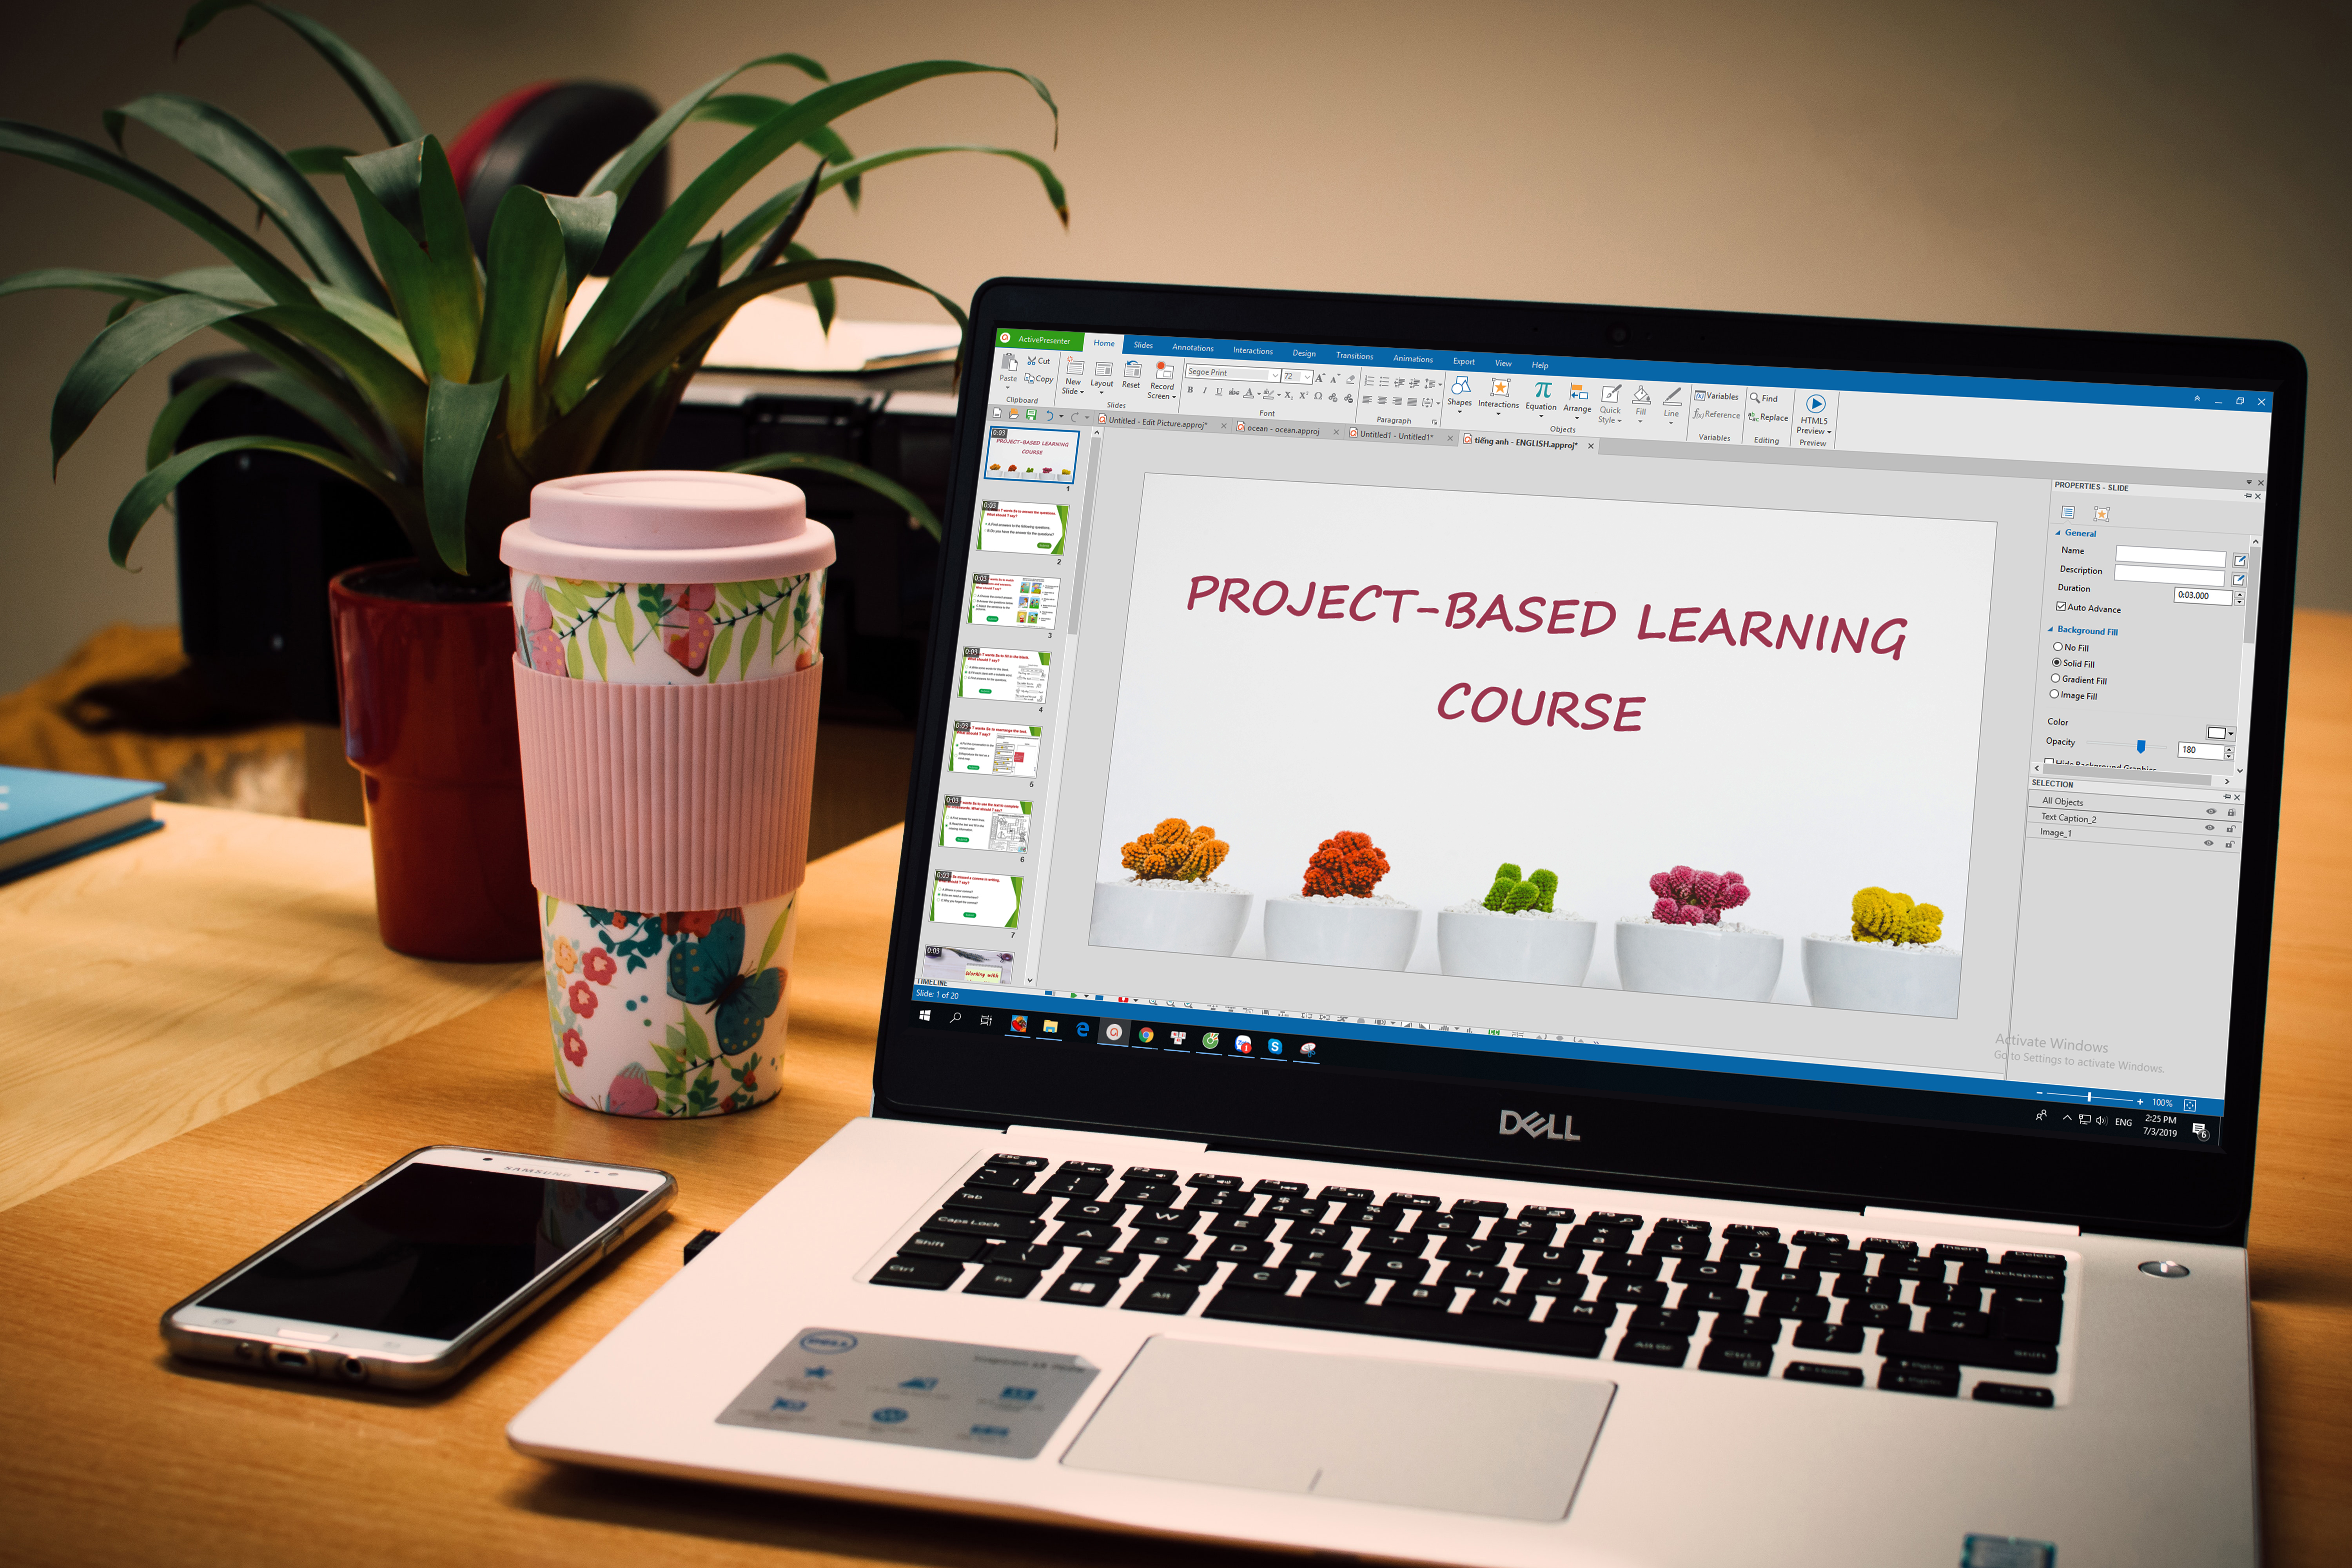 The Definition of Project-Based Learning